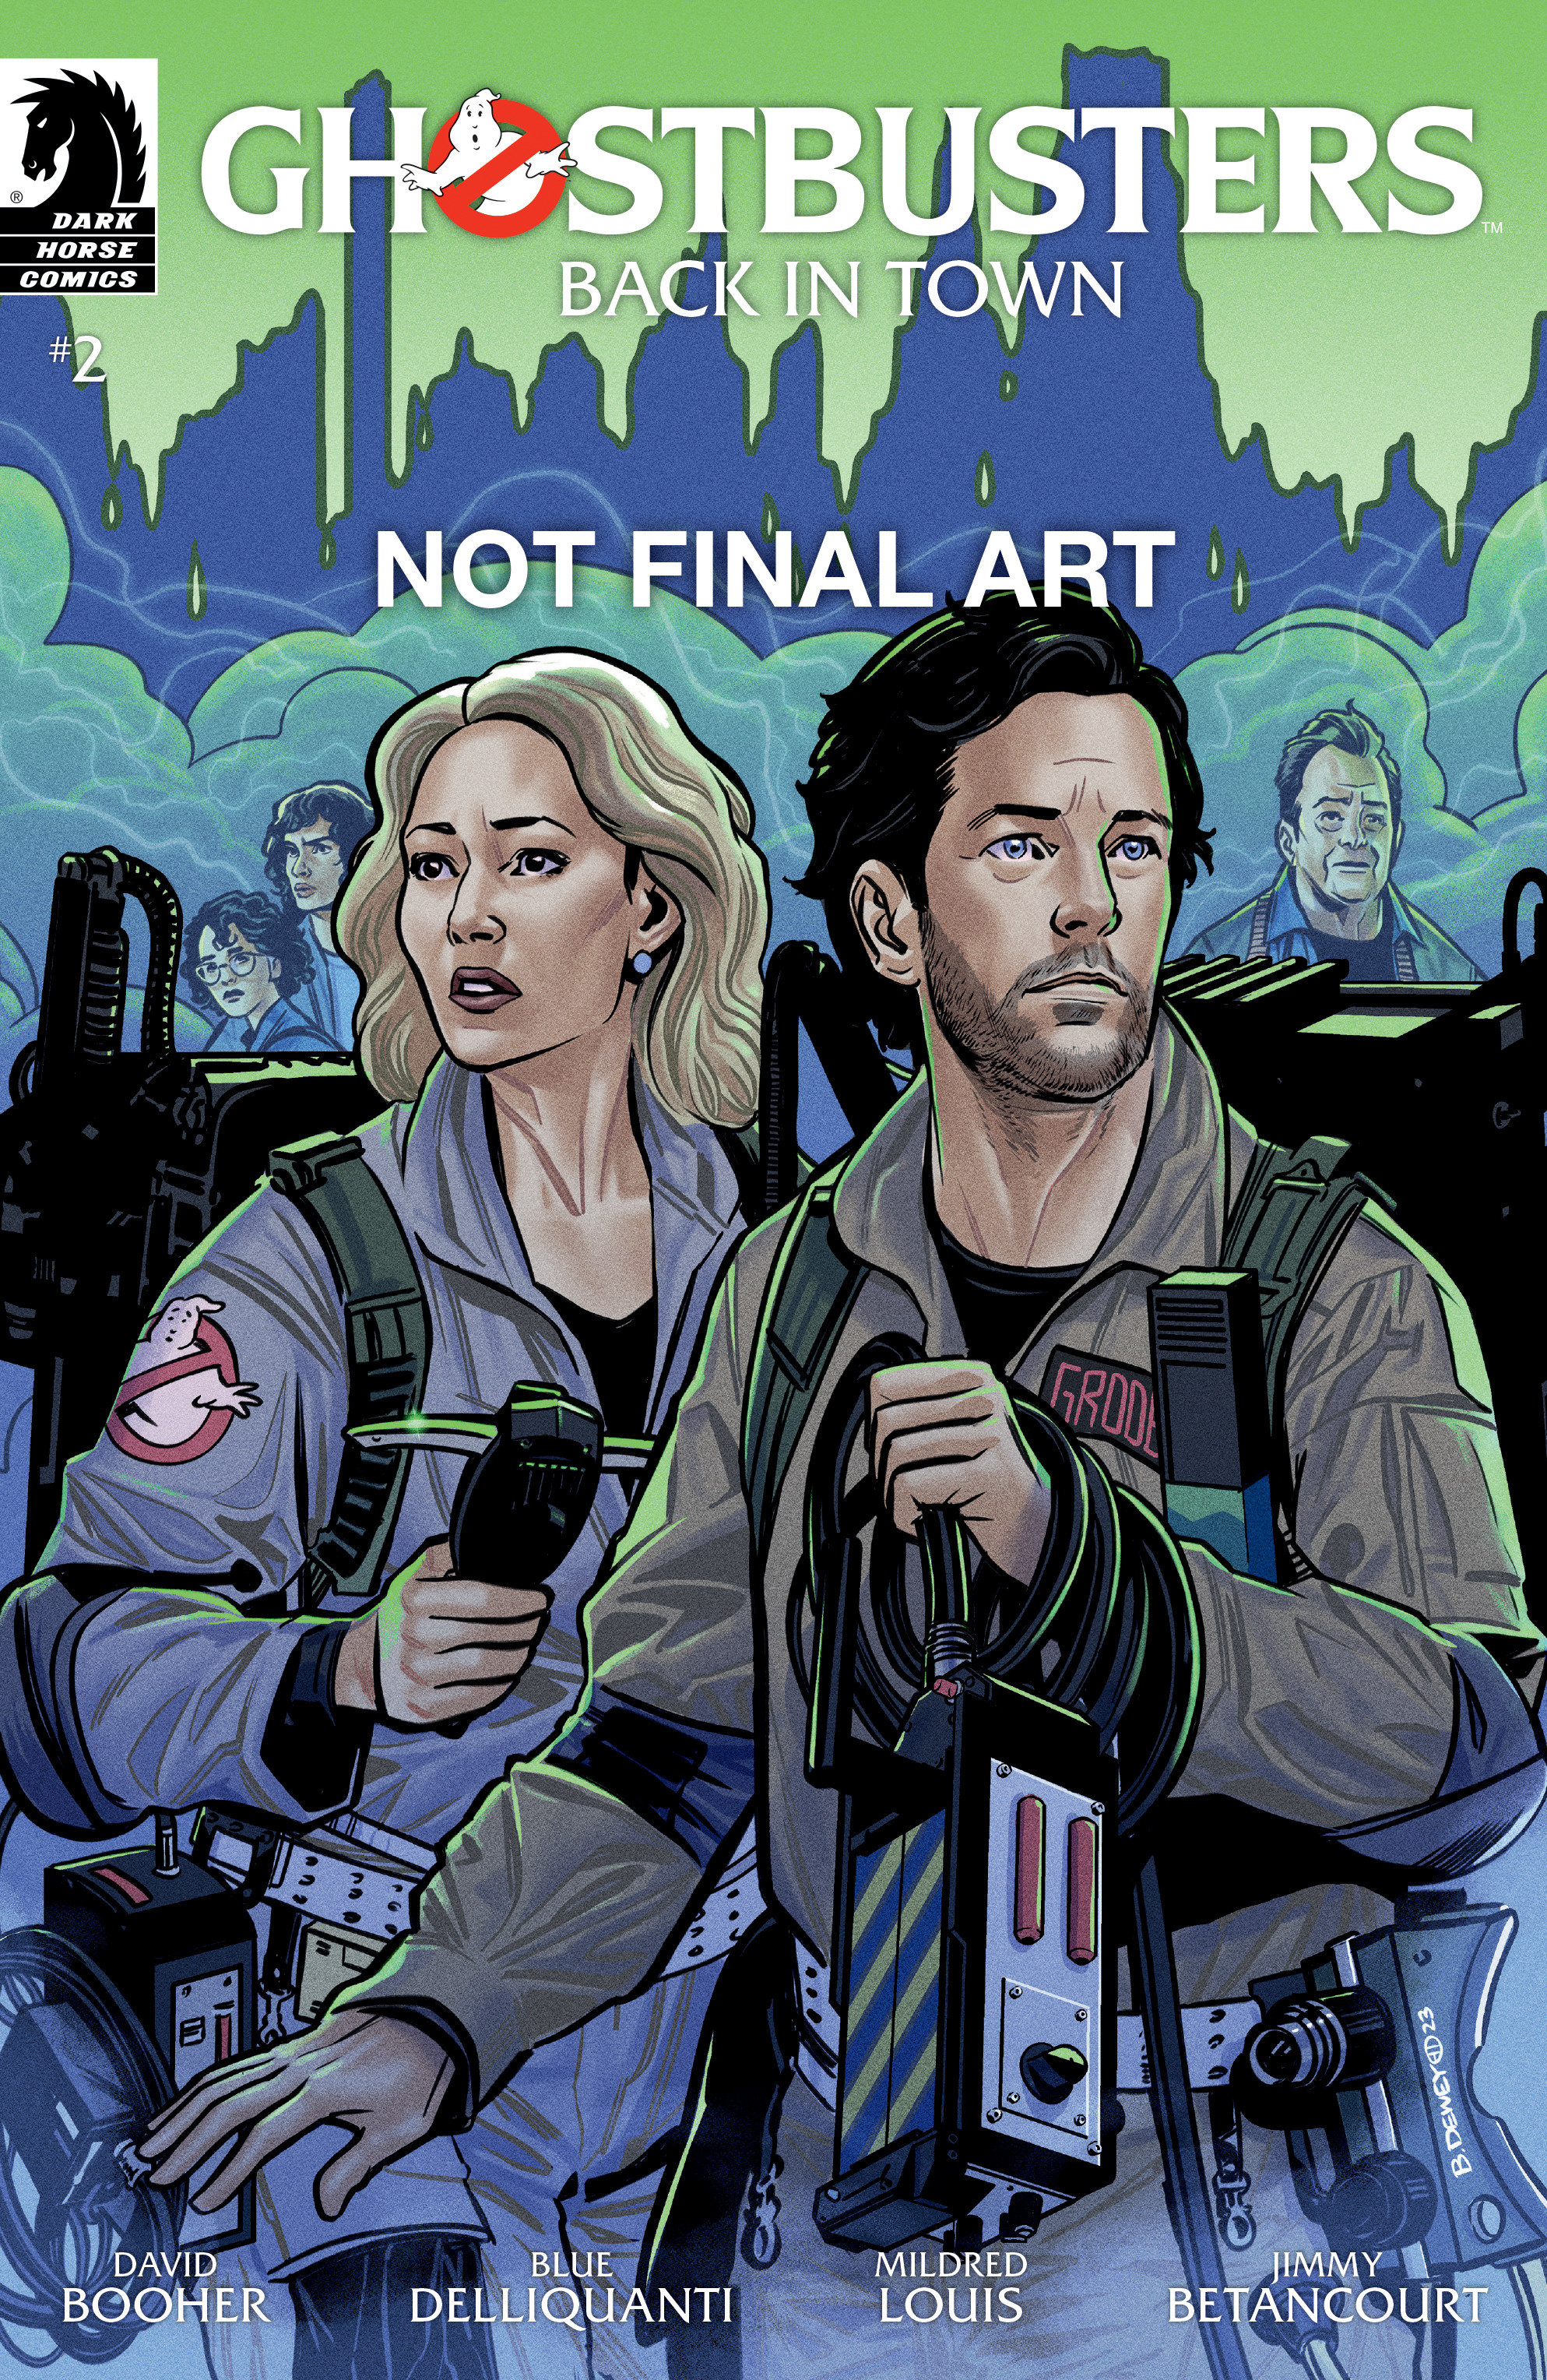 Ghostbusters Back in Town #2 Cover B (Ben Dewey)